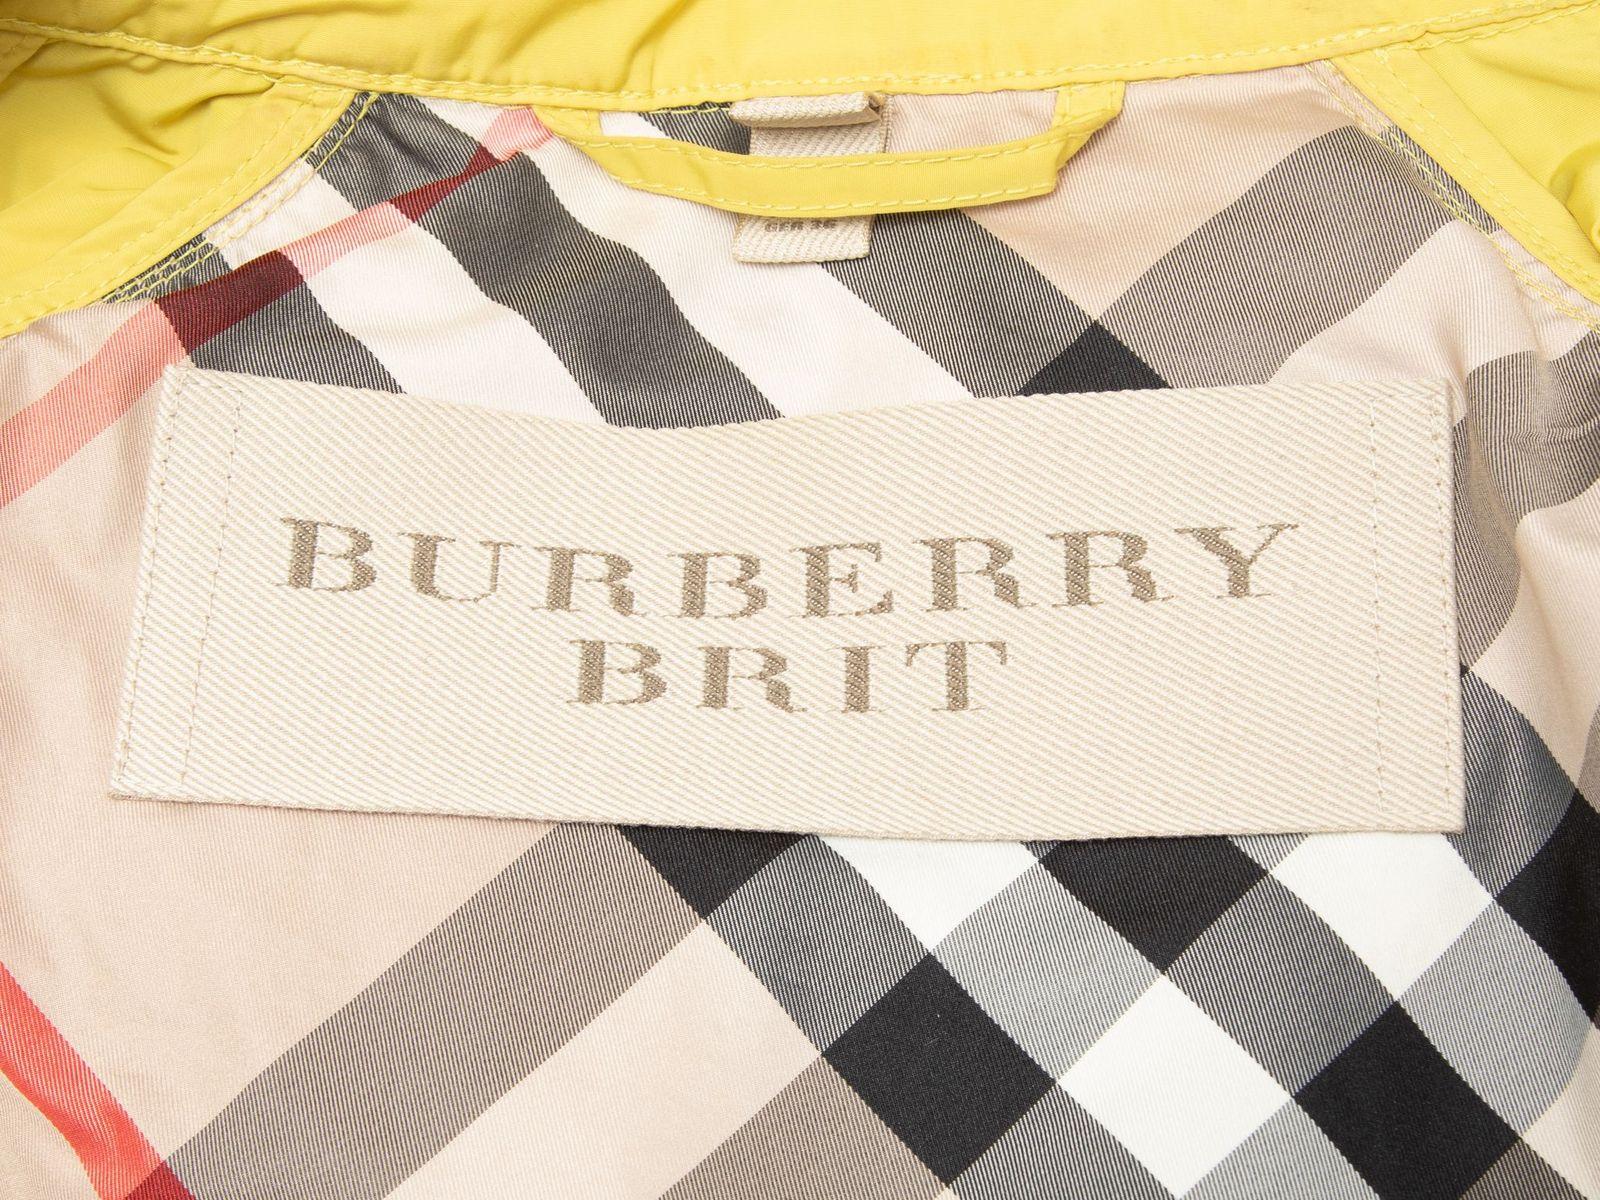 Product Details: Yellow nylon hooded jacket by Burberry Brit. Dual hip pockets. Button closures at front. 34